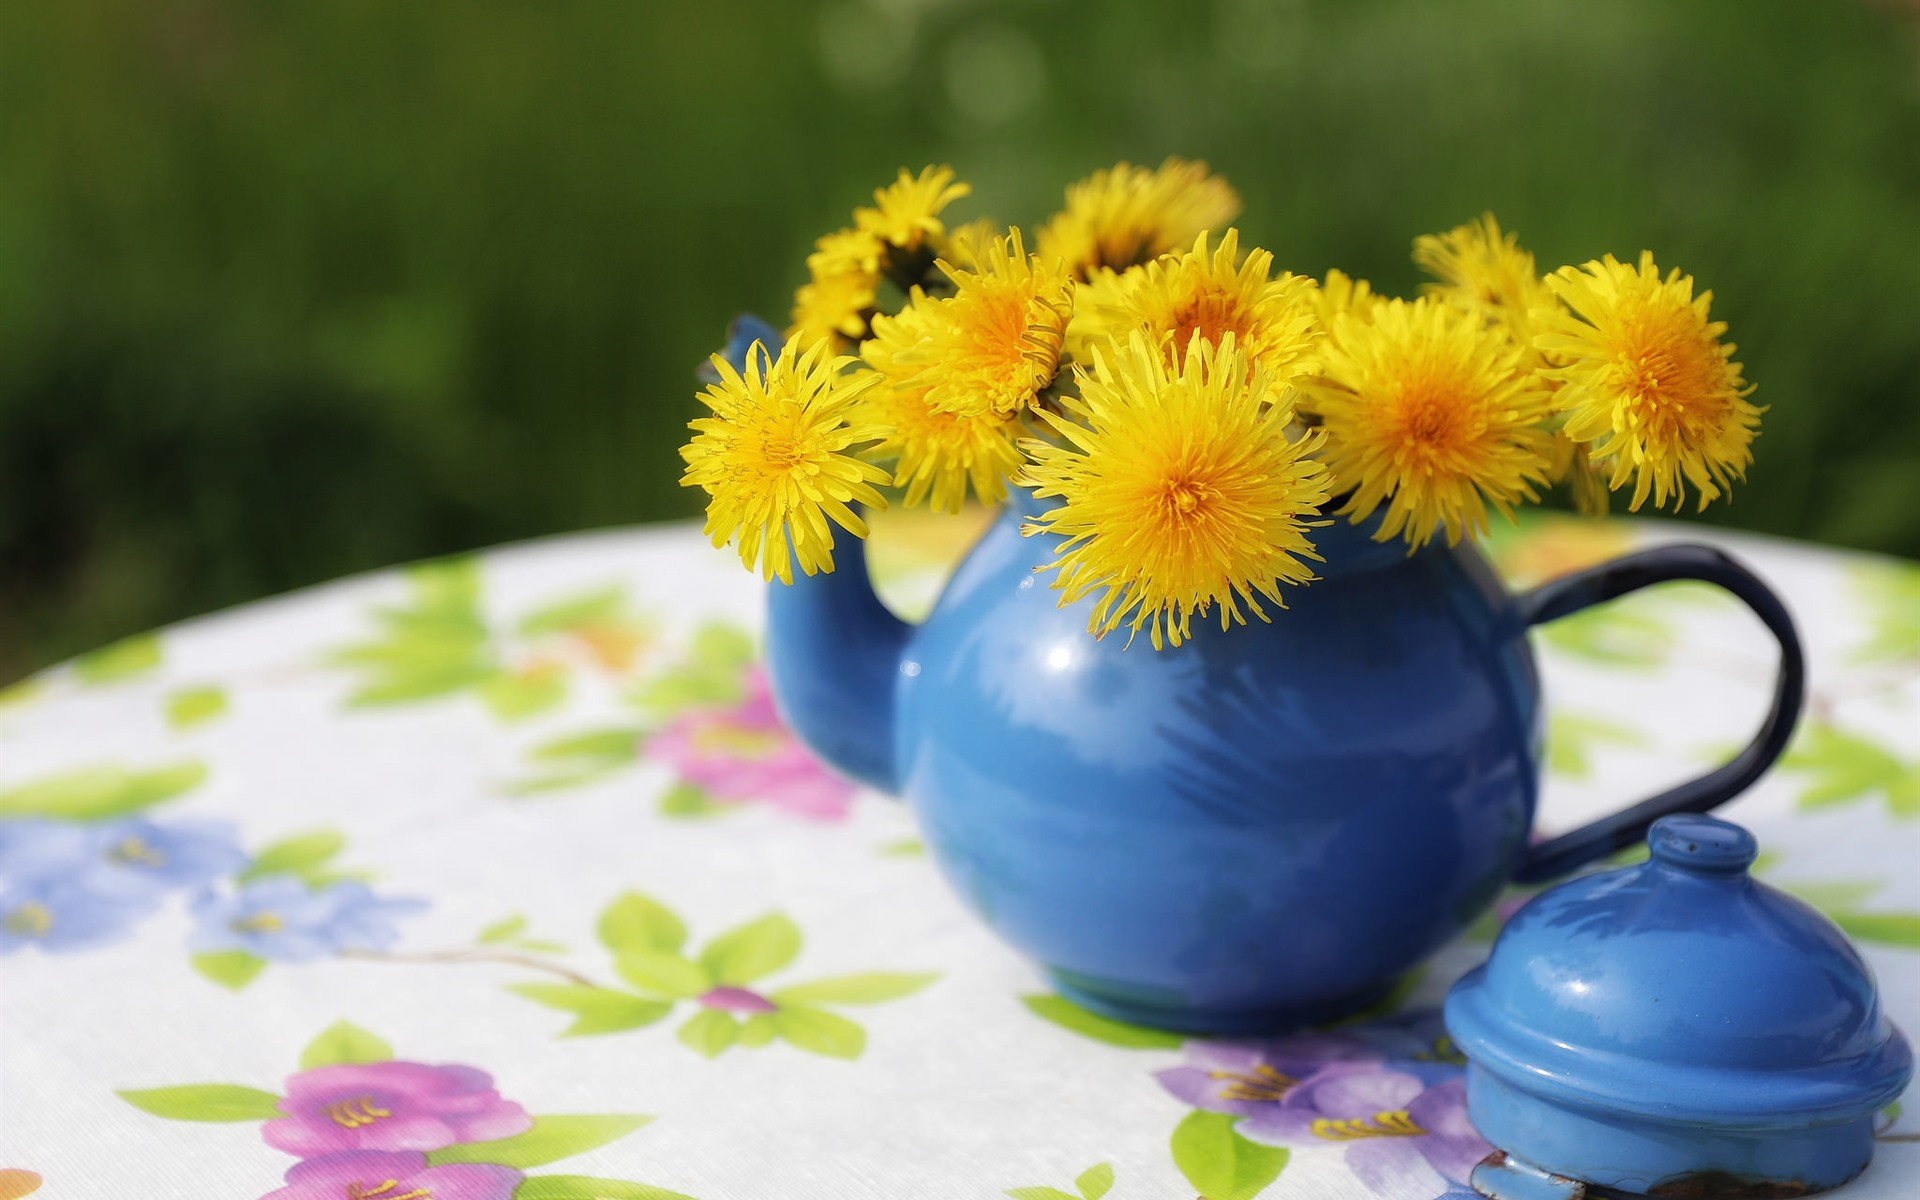 Blue teapot with yellow dandelions